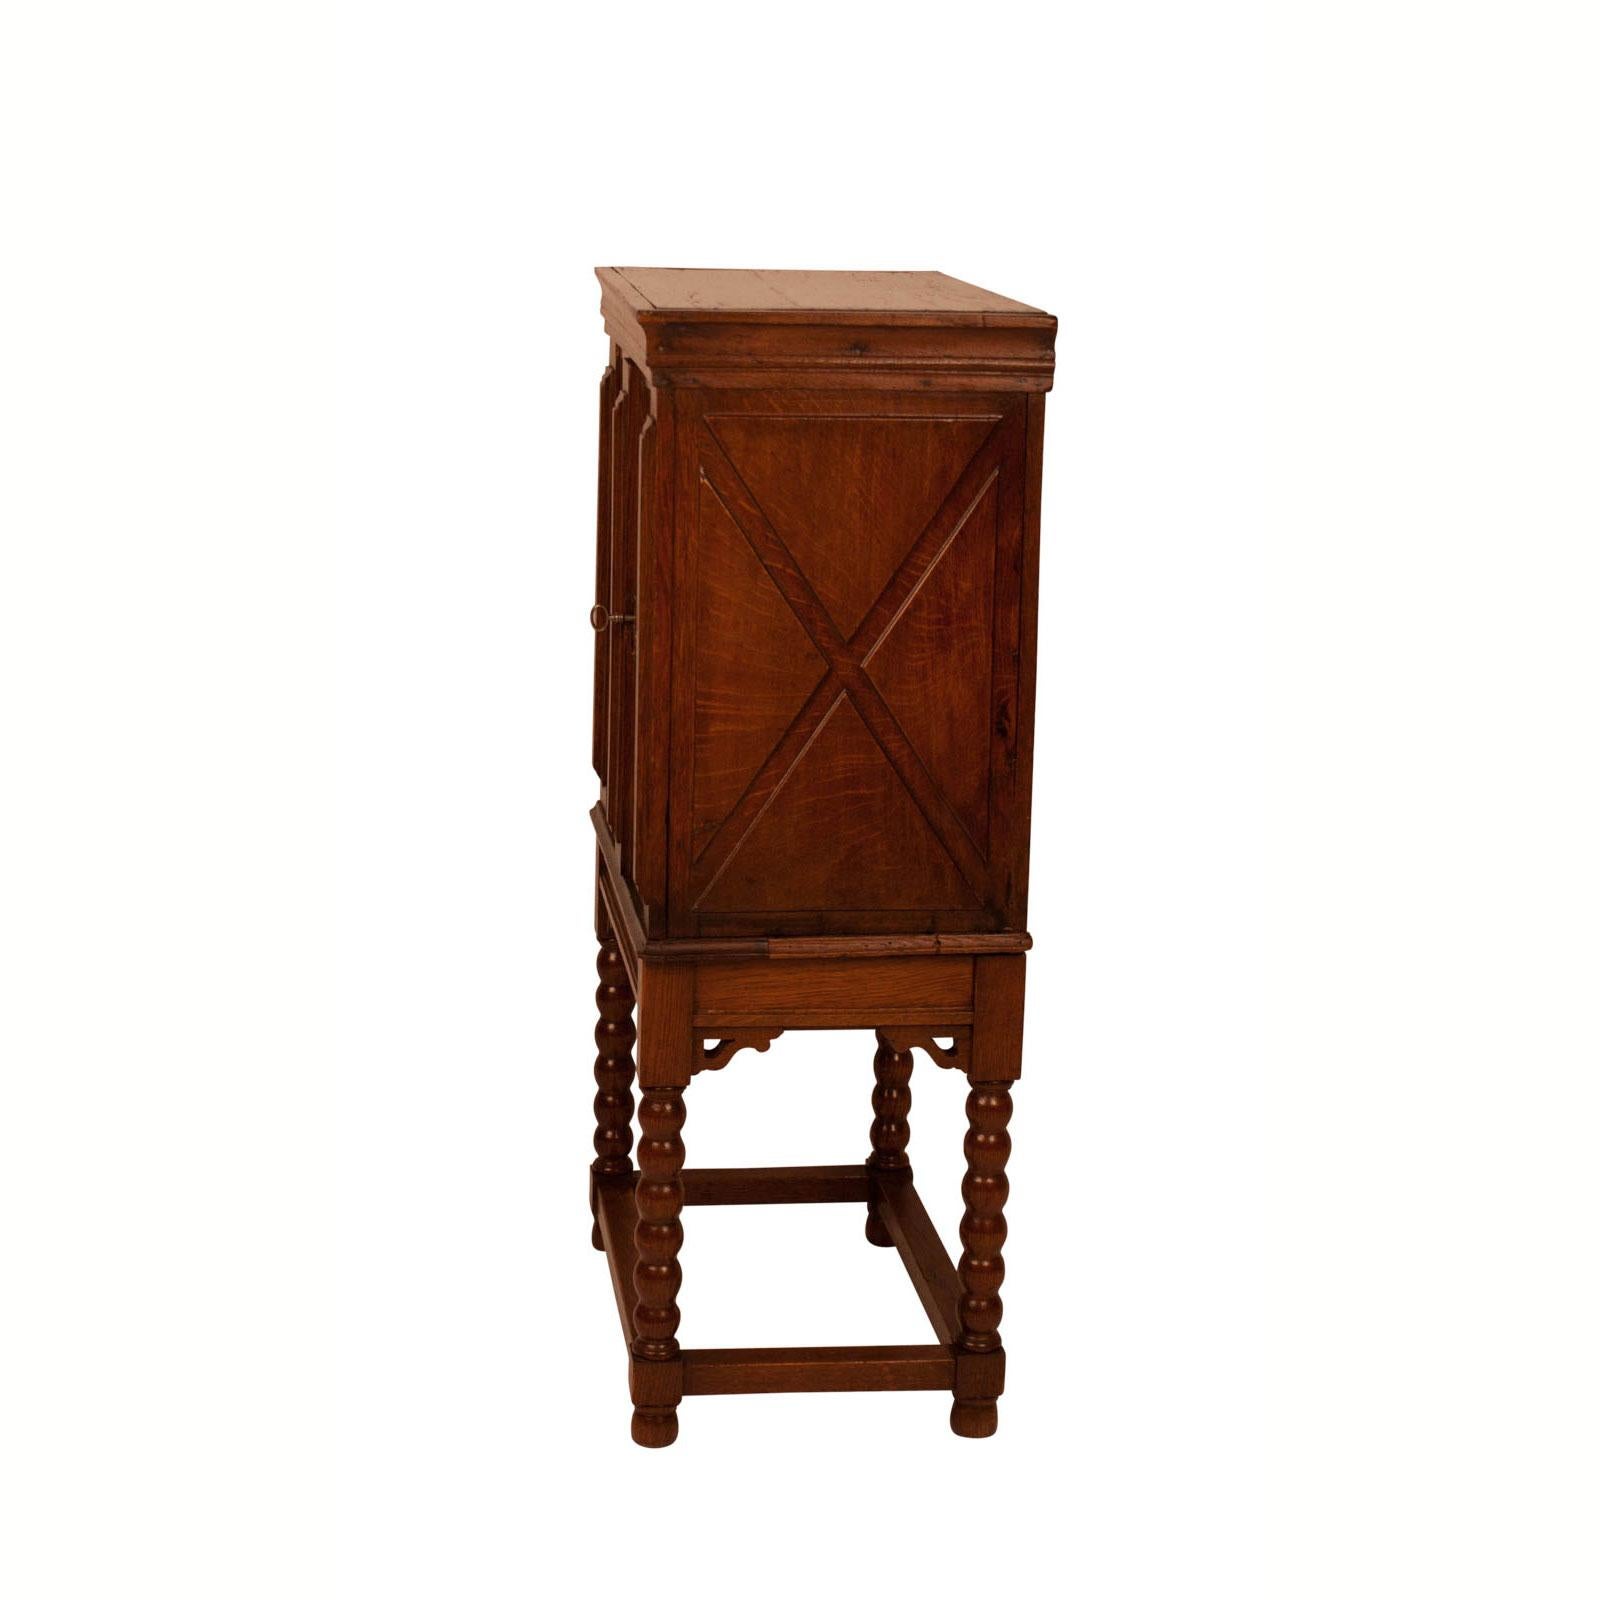 19th Century French Baroque Cabinet on Later Stand, circa 1800